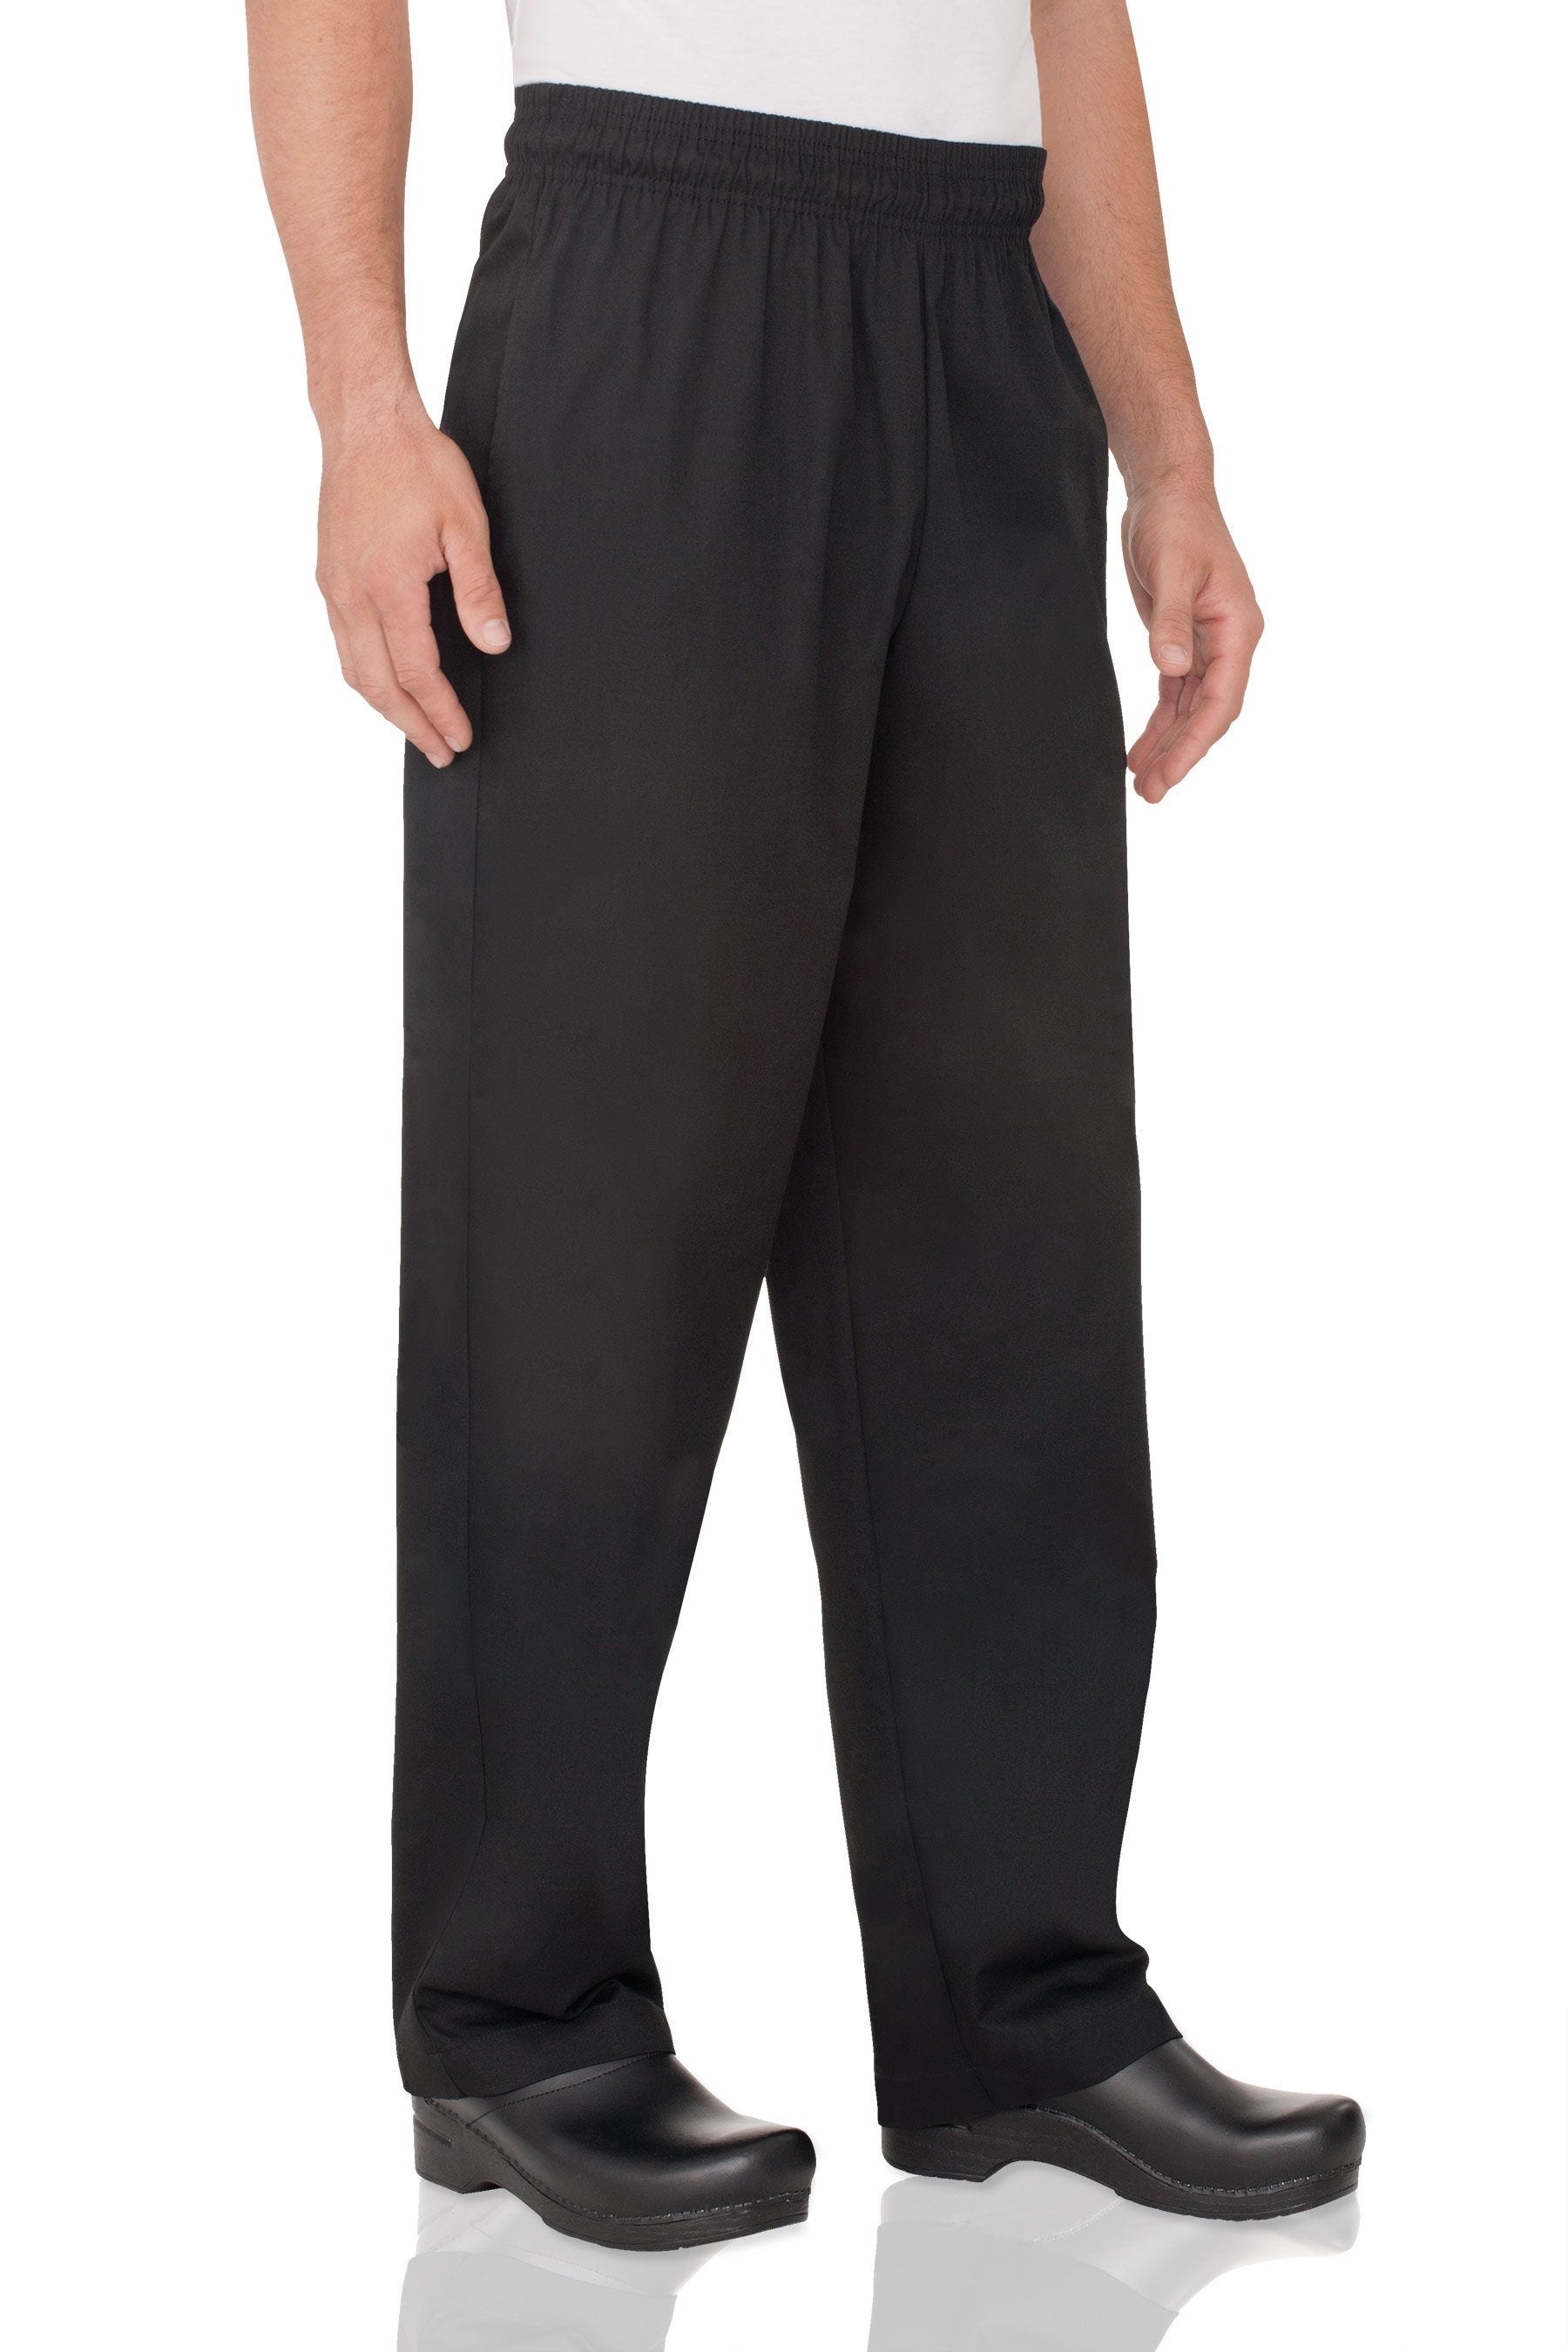 Black X-Small FREE2DAYSHIP NEW Chef Works Women's Essential Baggy Chef Pants 